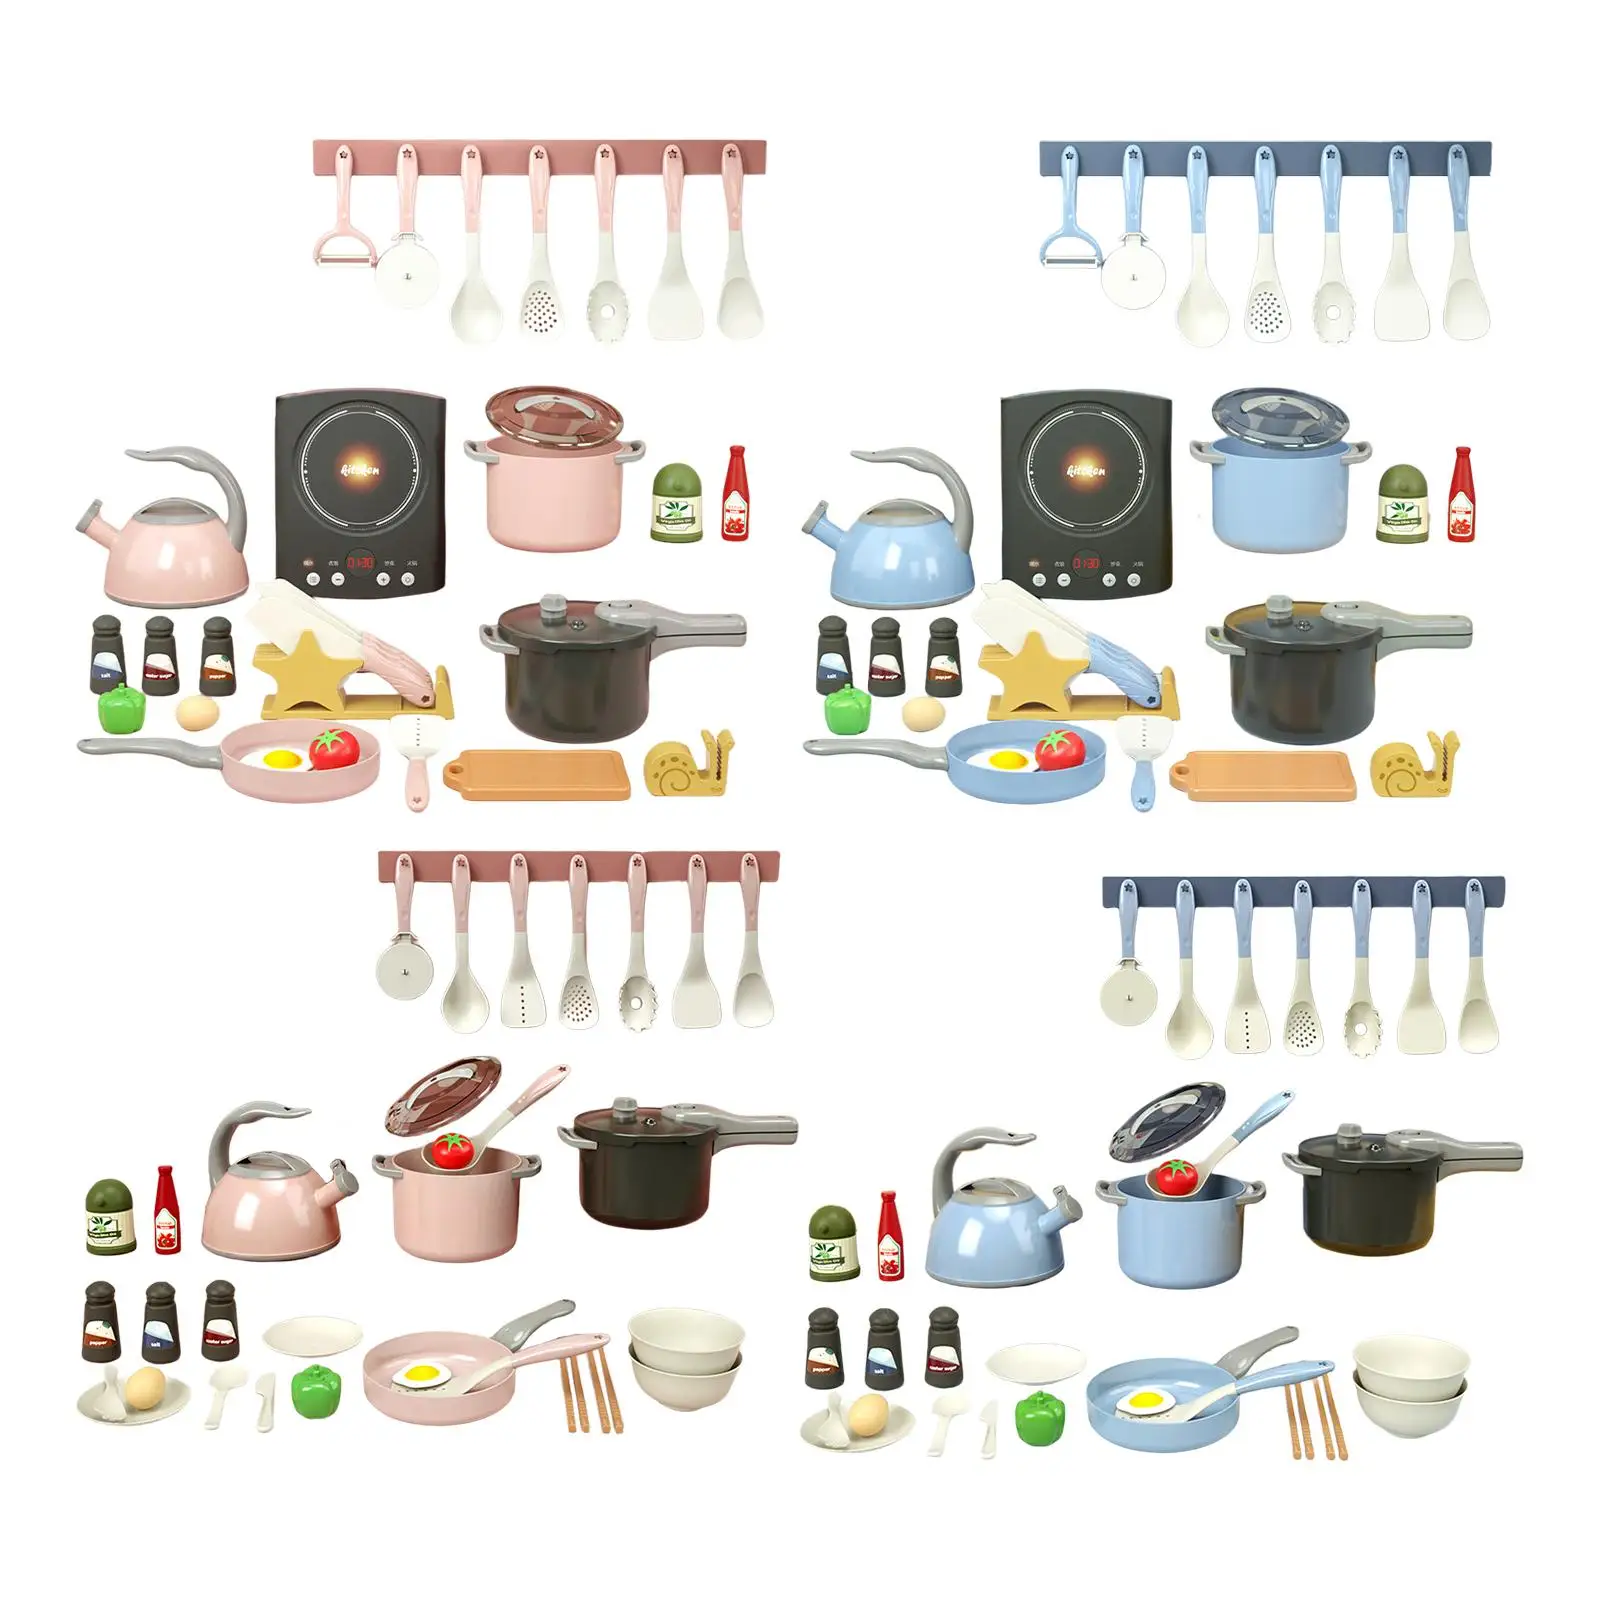 Pretend Play Kitchen Toy Pretend Cooking Toy Kitchen Accessories Set Cookware Appliance for Toddler Party Favors Children Kids